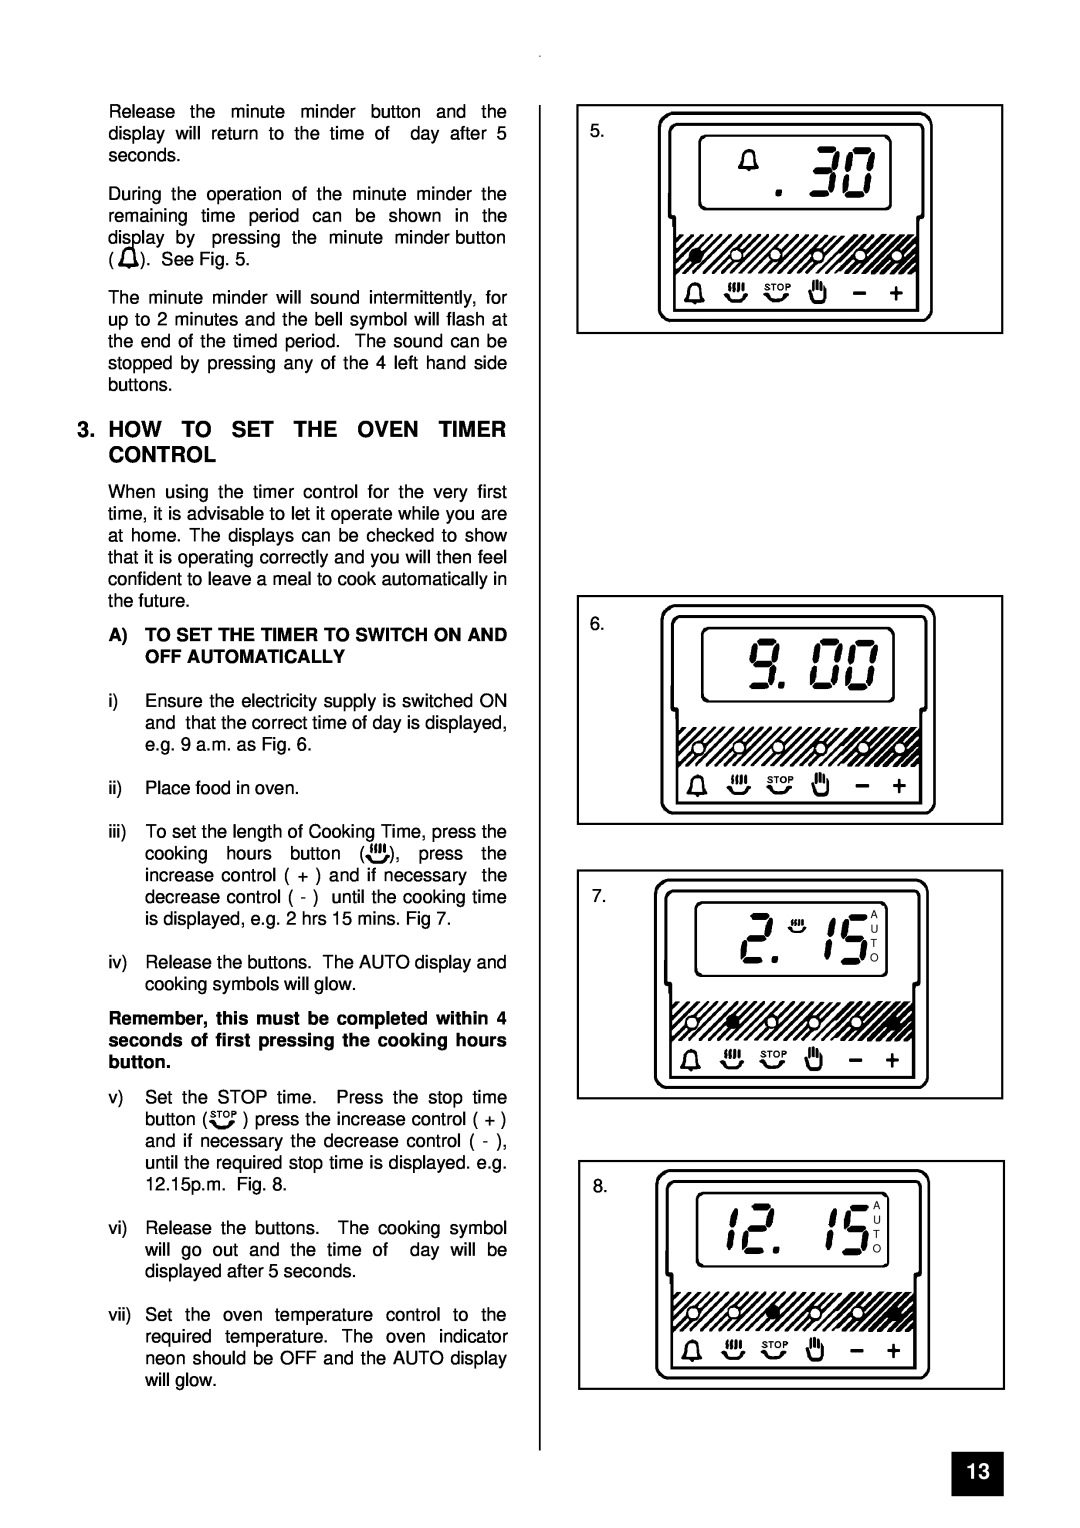 Zanussi ZCE 7400 manual How To Set The Oven Timer Control, A To Set The Timer To Switch On And Off Automatically 